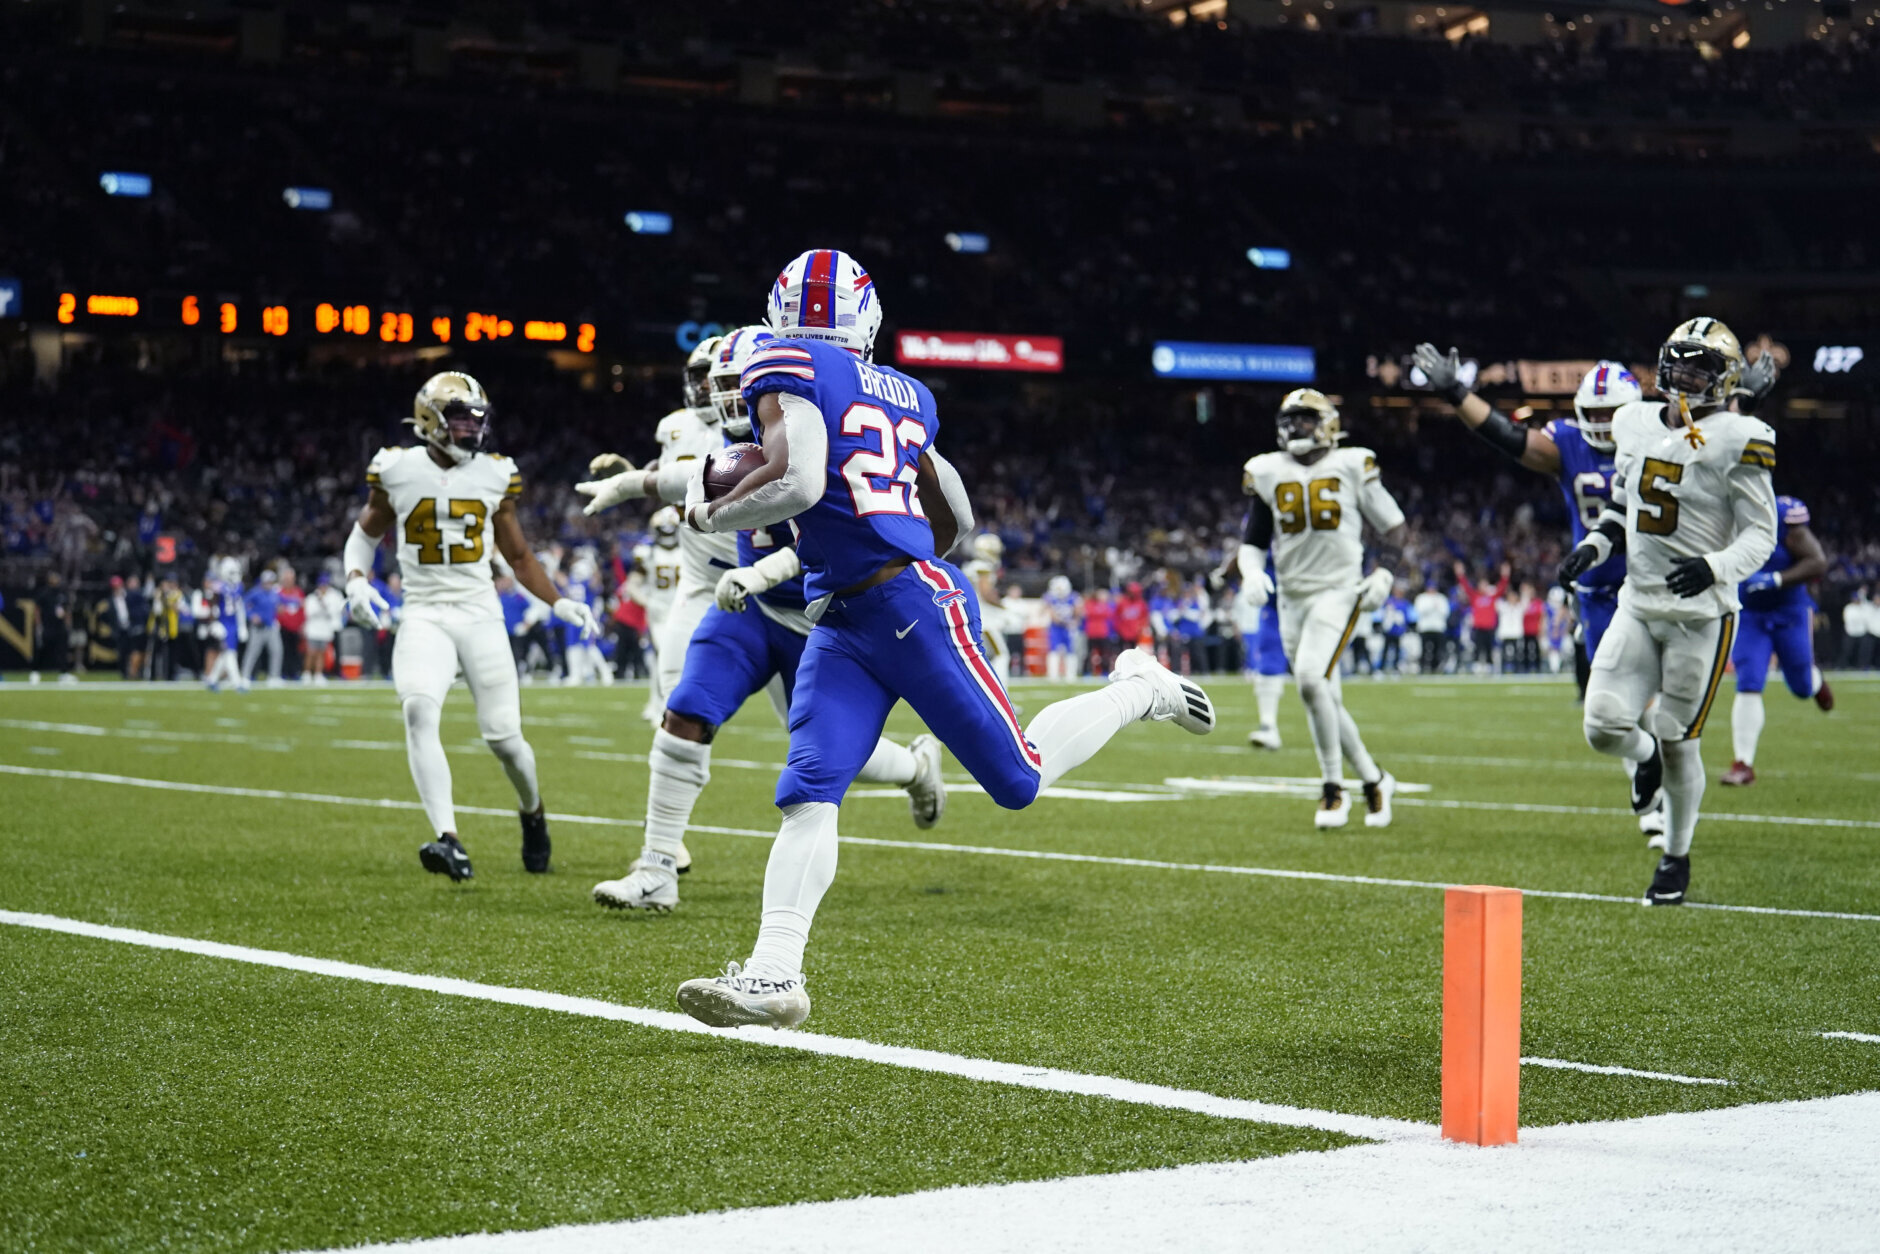 <p><em><strong>Bills 31</strong></em><br />
<em><strong>Saints 6</strong></em></p>
<p>For a holiday known for being home with family, it sure is weird to see the road teams on Thanksgiving Day go 8-0 since 2019. But there was New Orleans getting held to six or fewer points at home for the first time in nearly two decades and Buffalo improving to 4-0 in games following a loss, winning each in a blowout. The Bills aren&#8217;t ready to concede the AFC East back to New England.</p>
